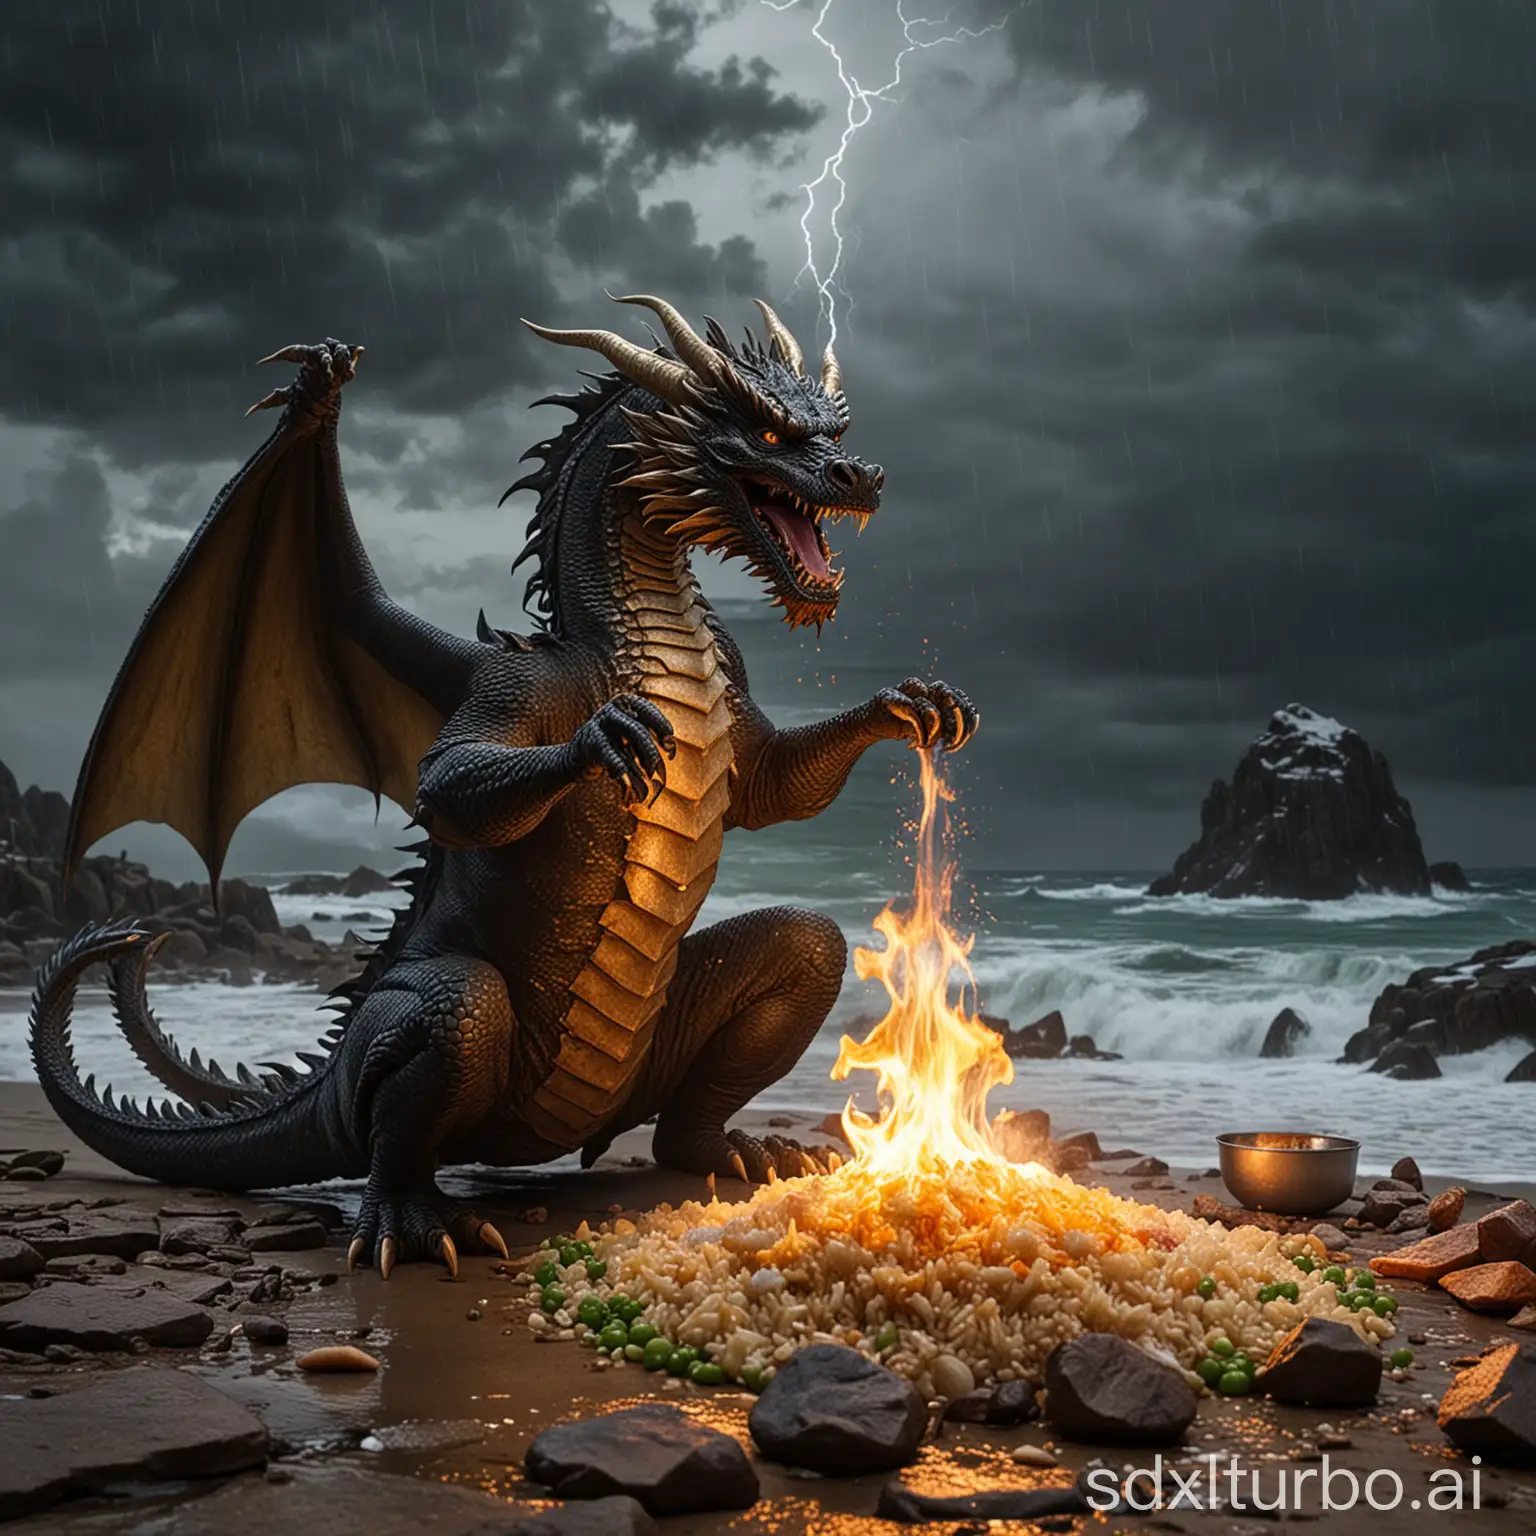 Dragon-Cooking-Fried-Rice-in-Stormy-Weather